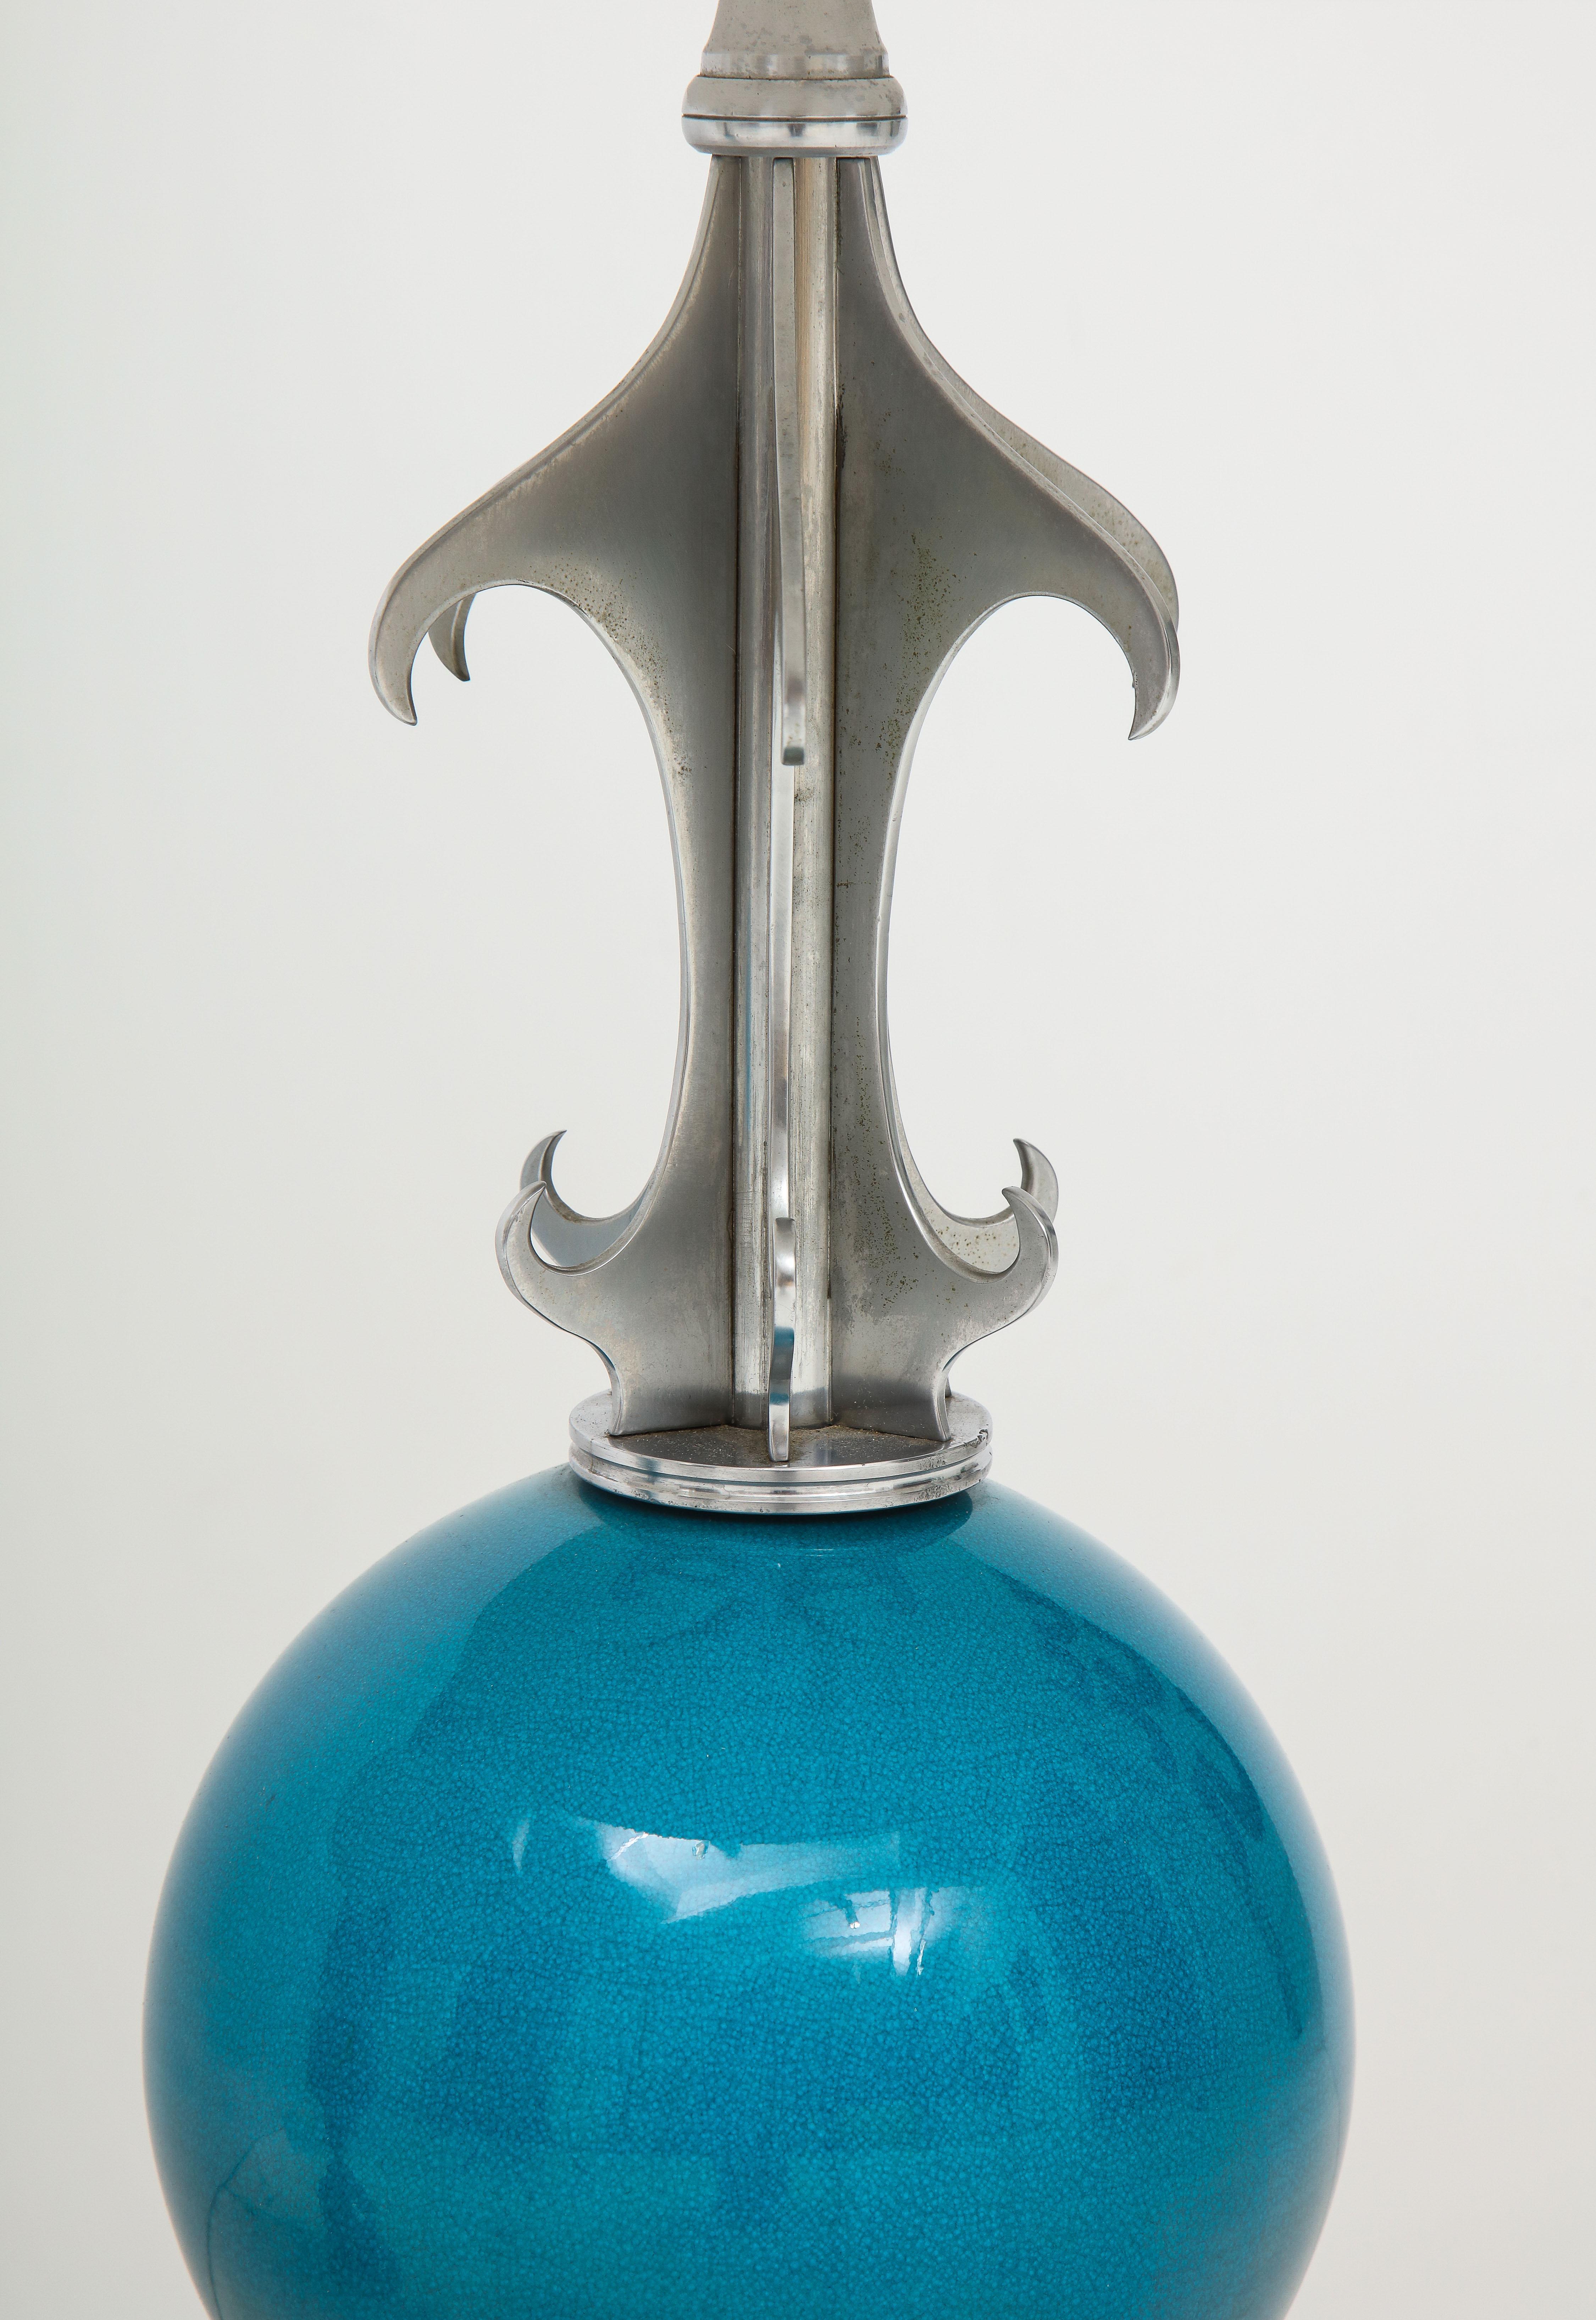 20th Century Pair of Blue Ceramic and Nickel-Plated Metal Table Lamps For Sale